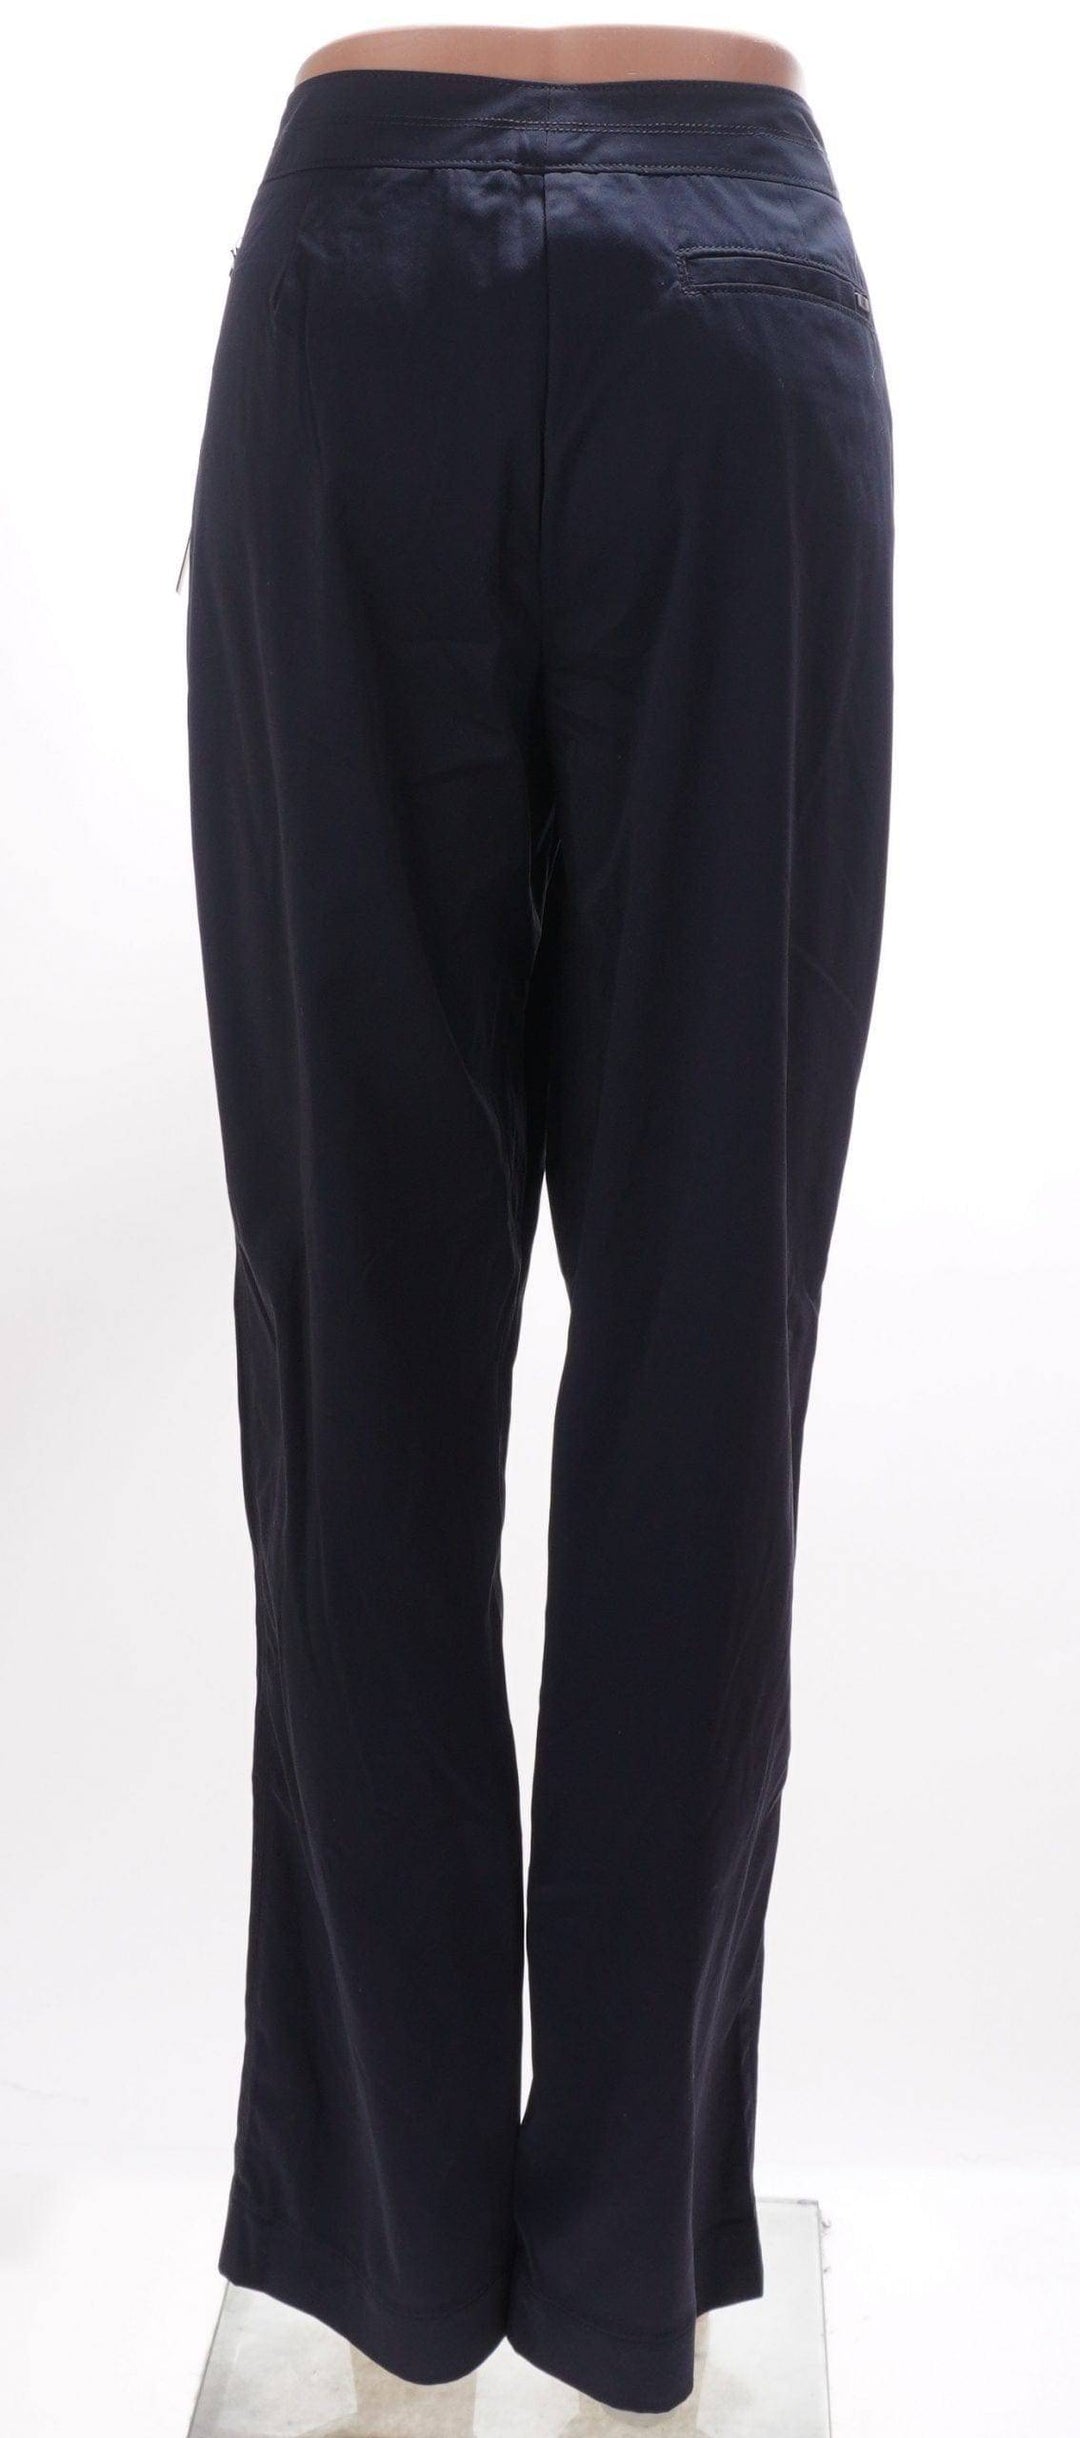 Tail Black / Consigned / 12 Tail Golf Pants - Black - Size 12